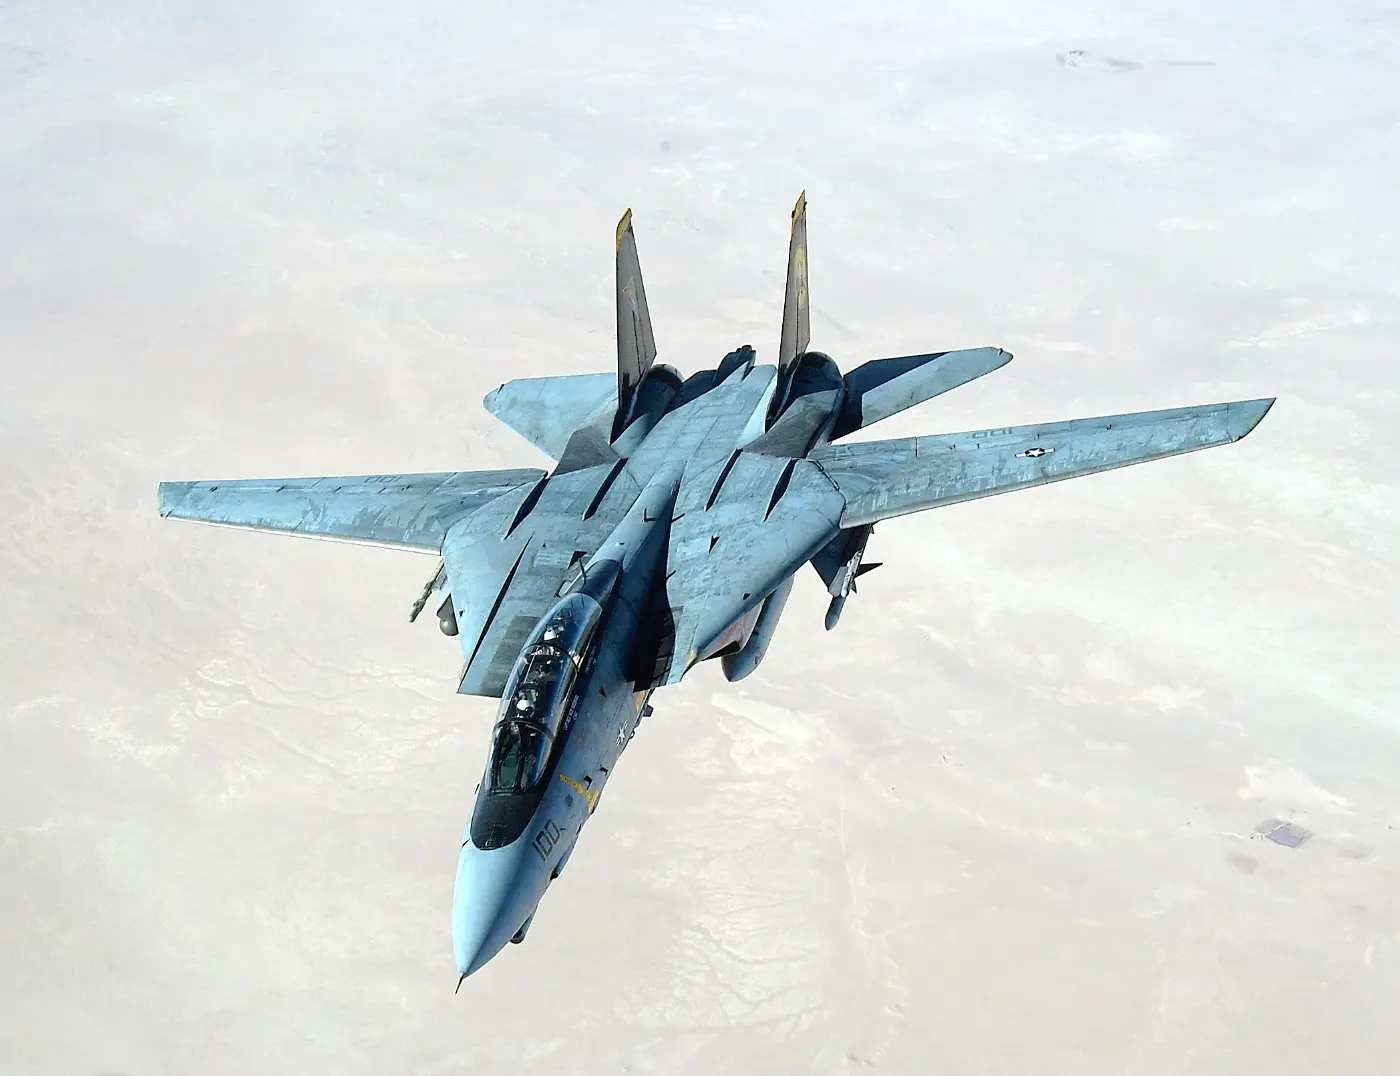 The Grumman F-14 Tomcat is a two-seater fighter aircraft capable of supersonic speeds.